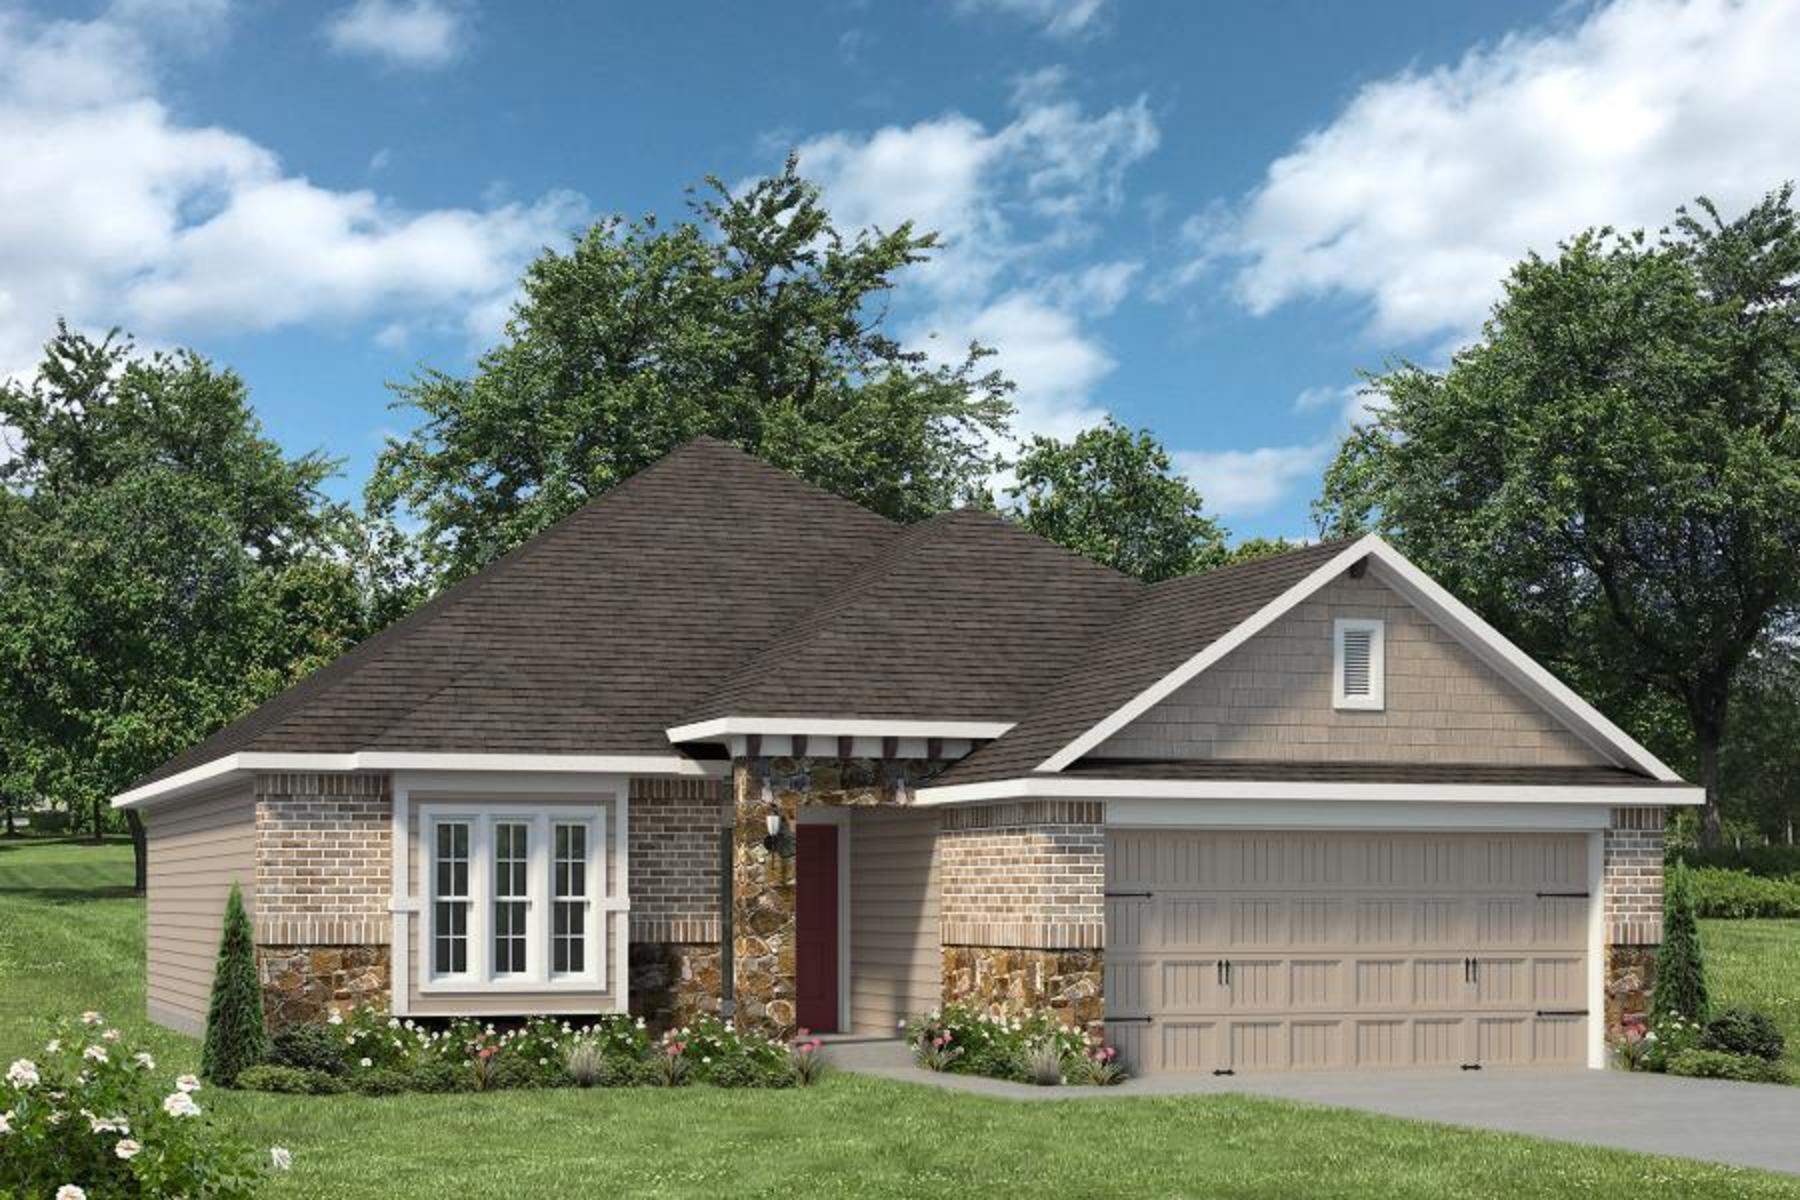 https://myhome.anewgo.com/client/stylecraft/community/Our%20Plans/plan/1613?elevId=54. Blakely New Home Floor Plan